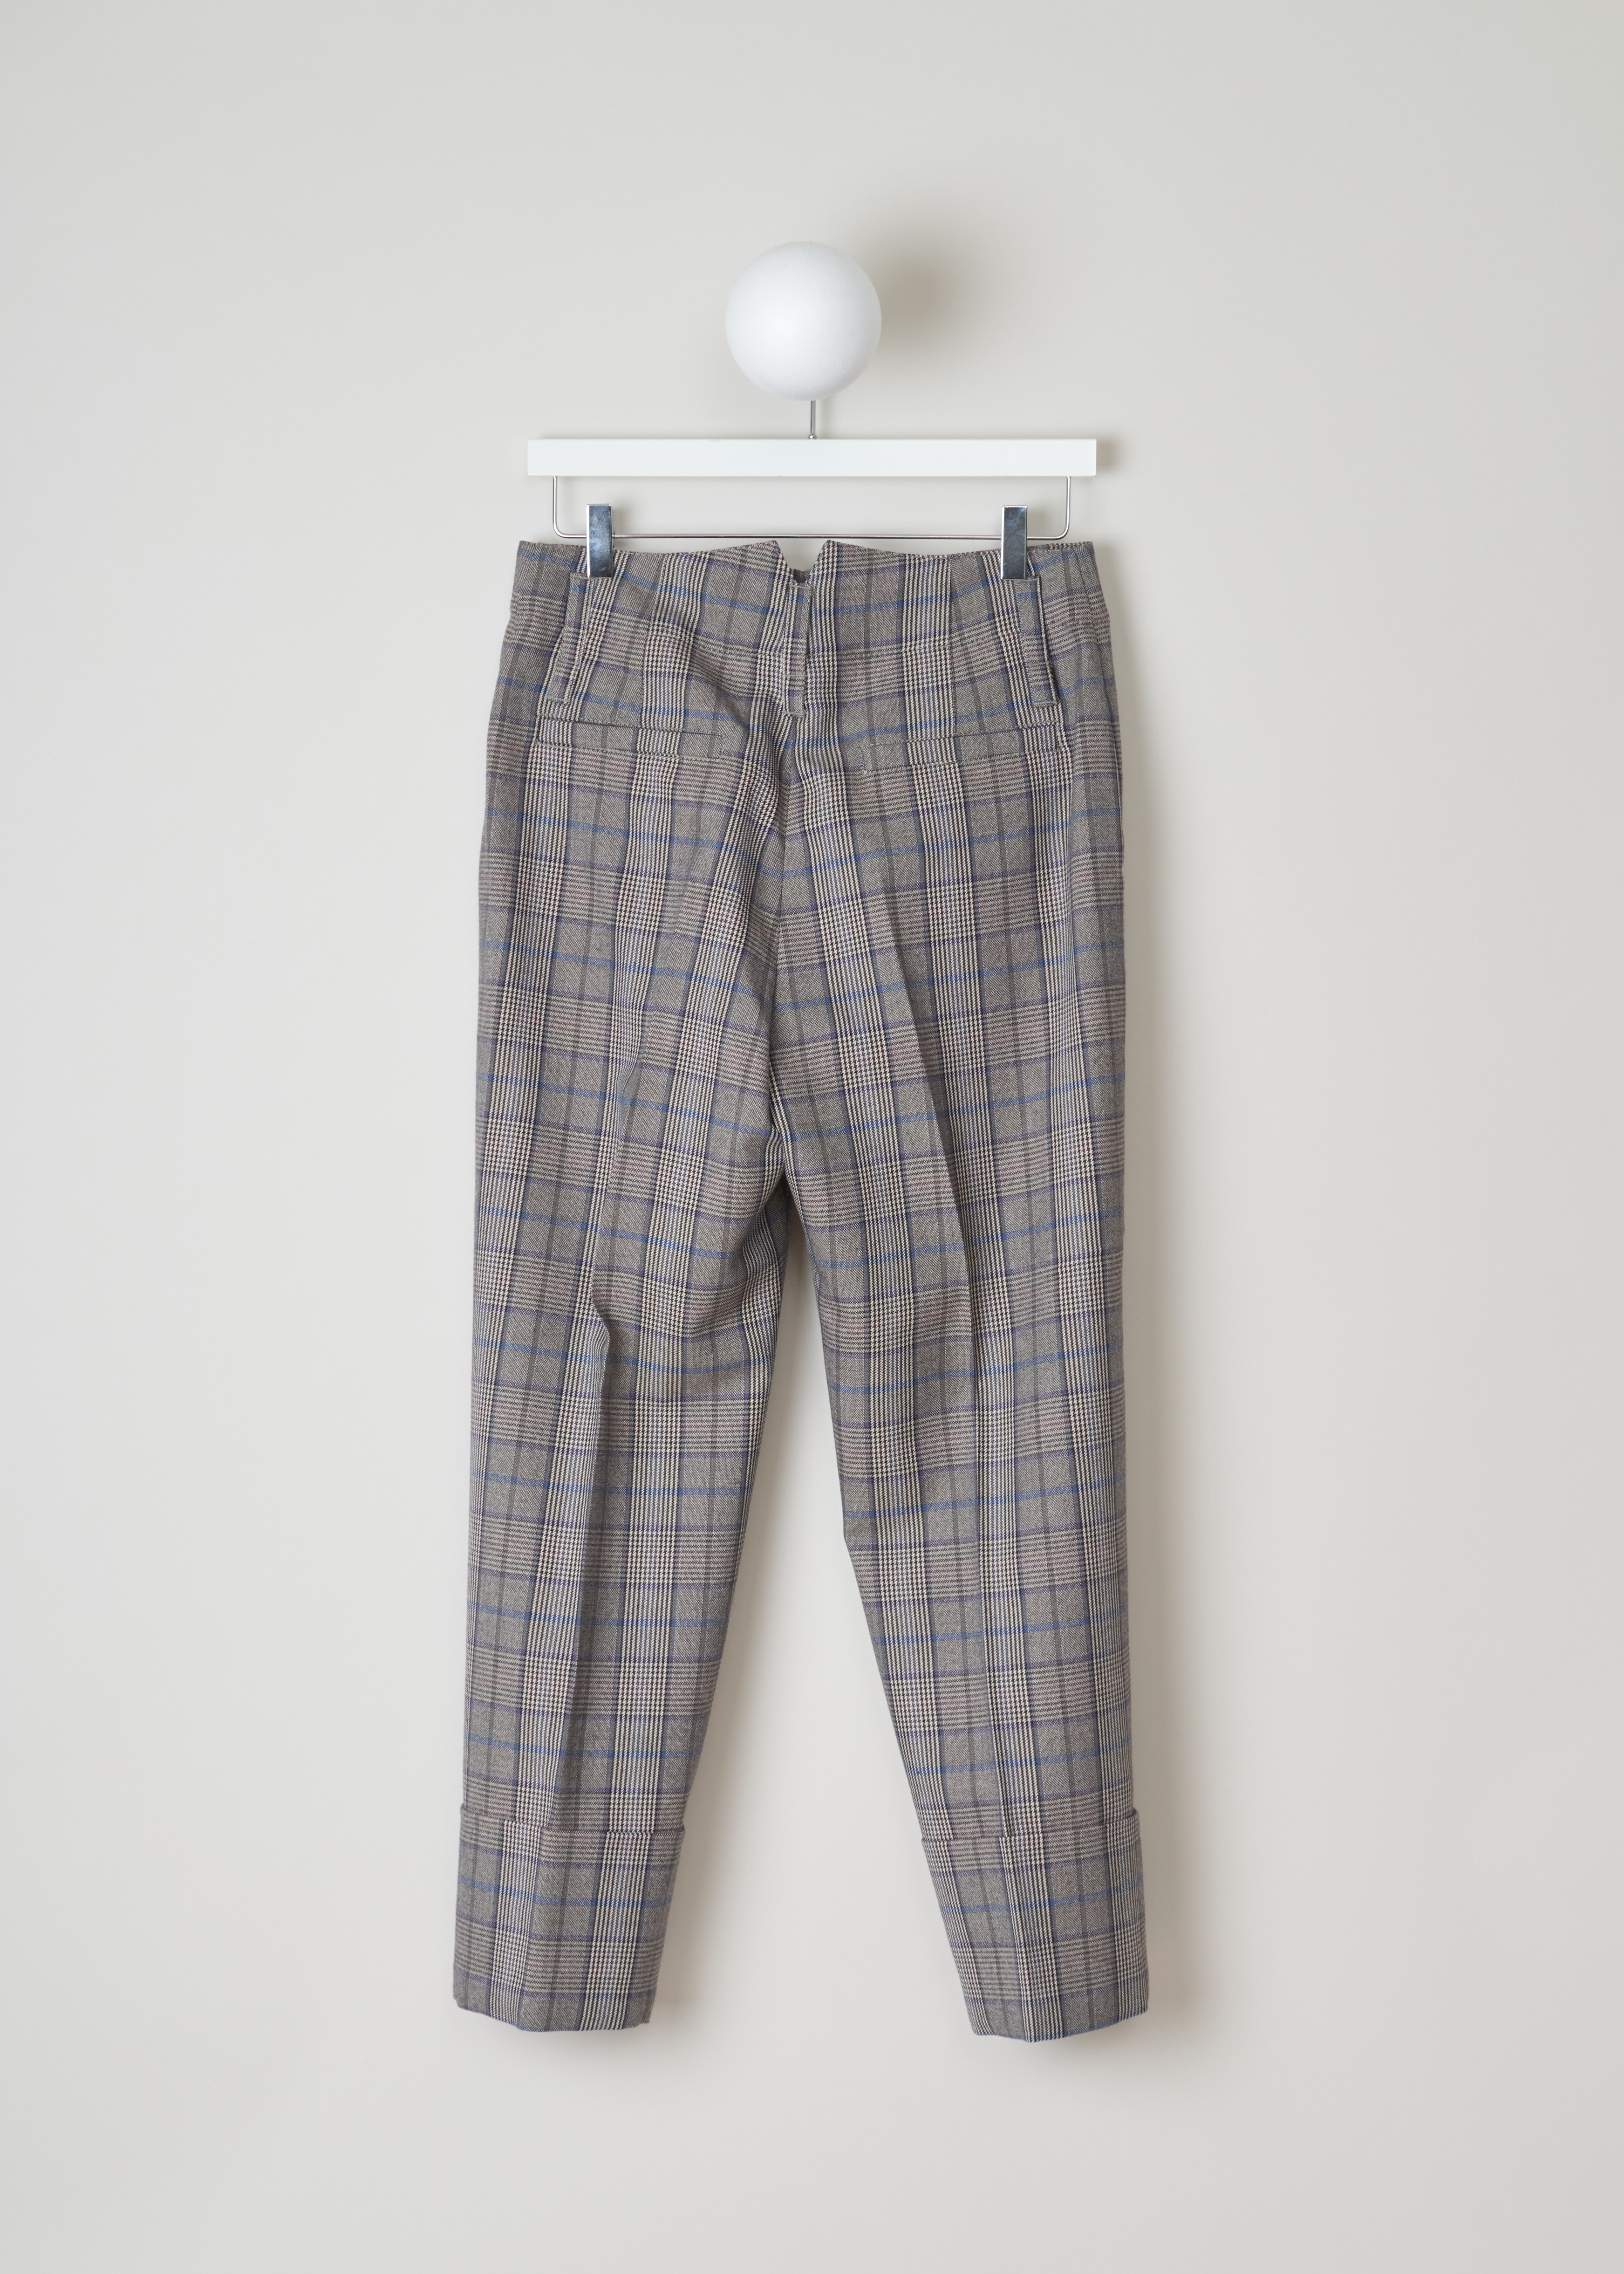 Brunello Cucinelli Brown purple blue checked pants, MB519P7027_C2547 brown back. These plaid wool pants in brown, with hints of purple and blue. Has cropped legs with a turn-up. Belt loops at the waistband. Two slant pockets on the front and two welt pockets on the back.